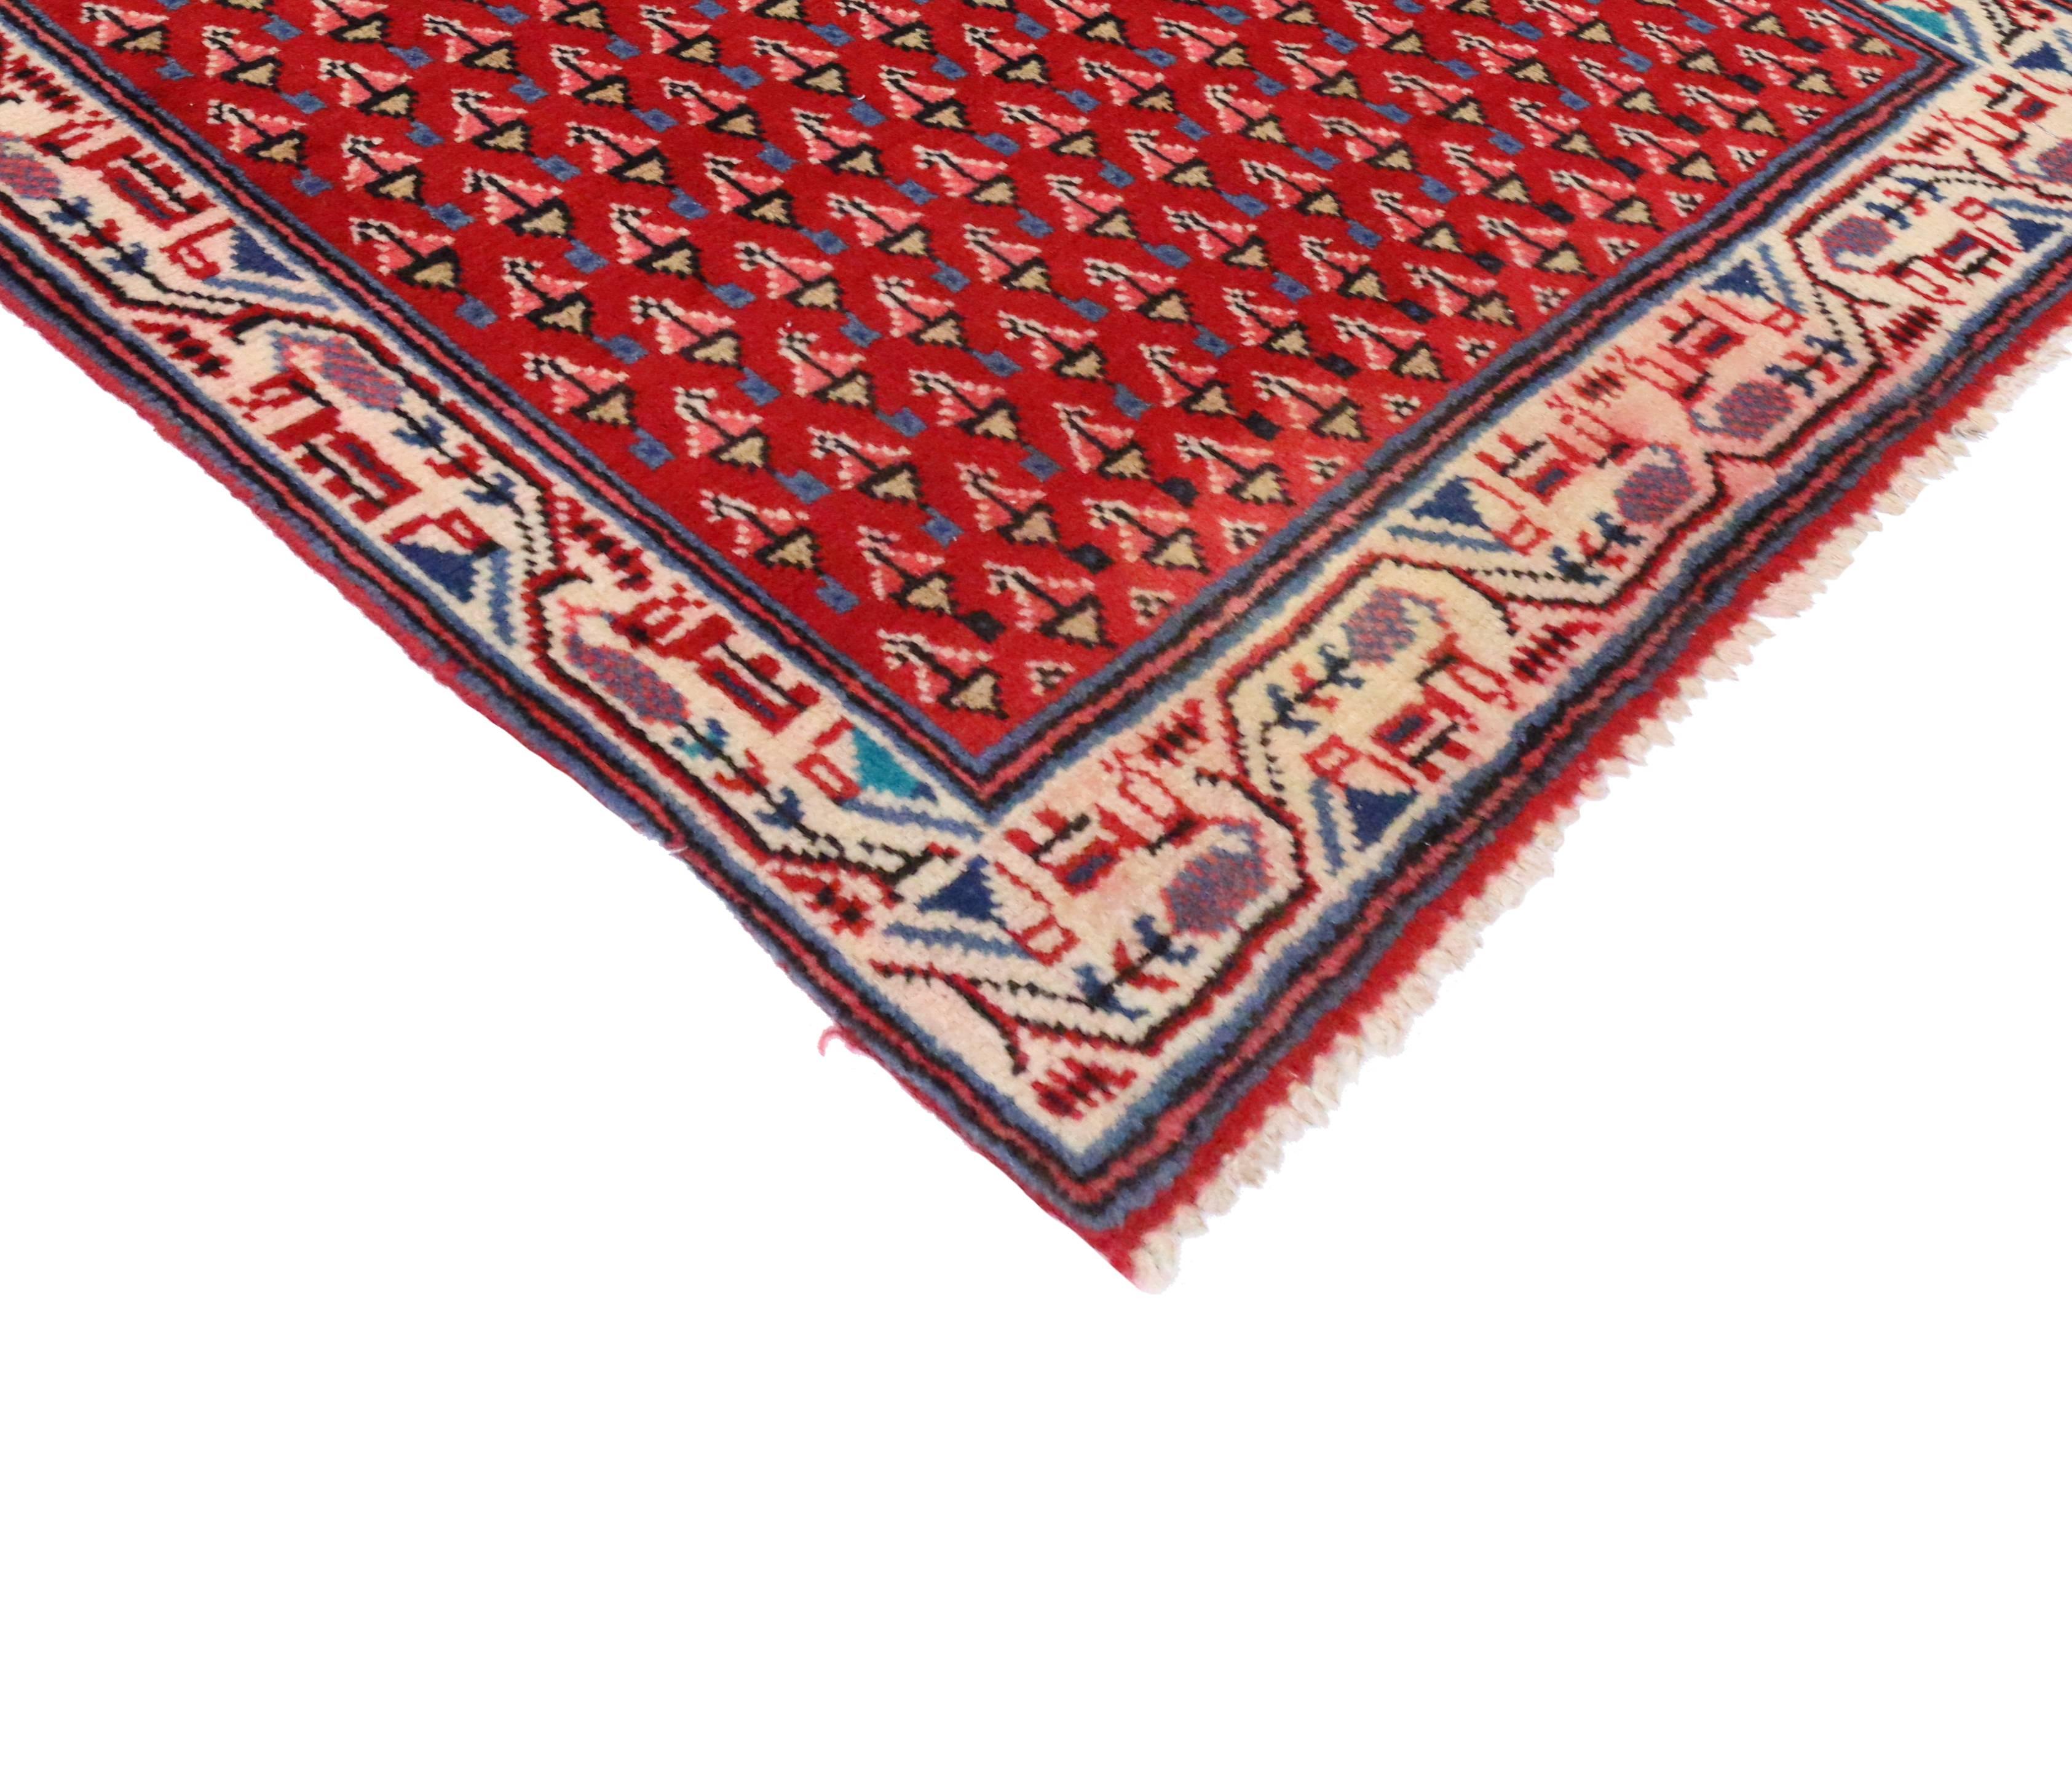 76151, vintage Persian Hamadan rug with Mir-A-Boteh design. Perfect for a small space such as a foyer or a hallway, this hand-knotted wool vintage Persian Hamadan rug features an all-over geometric design. The field is patterned with a rectilinear